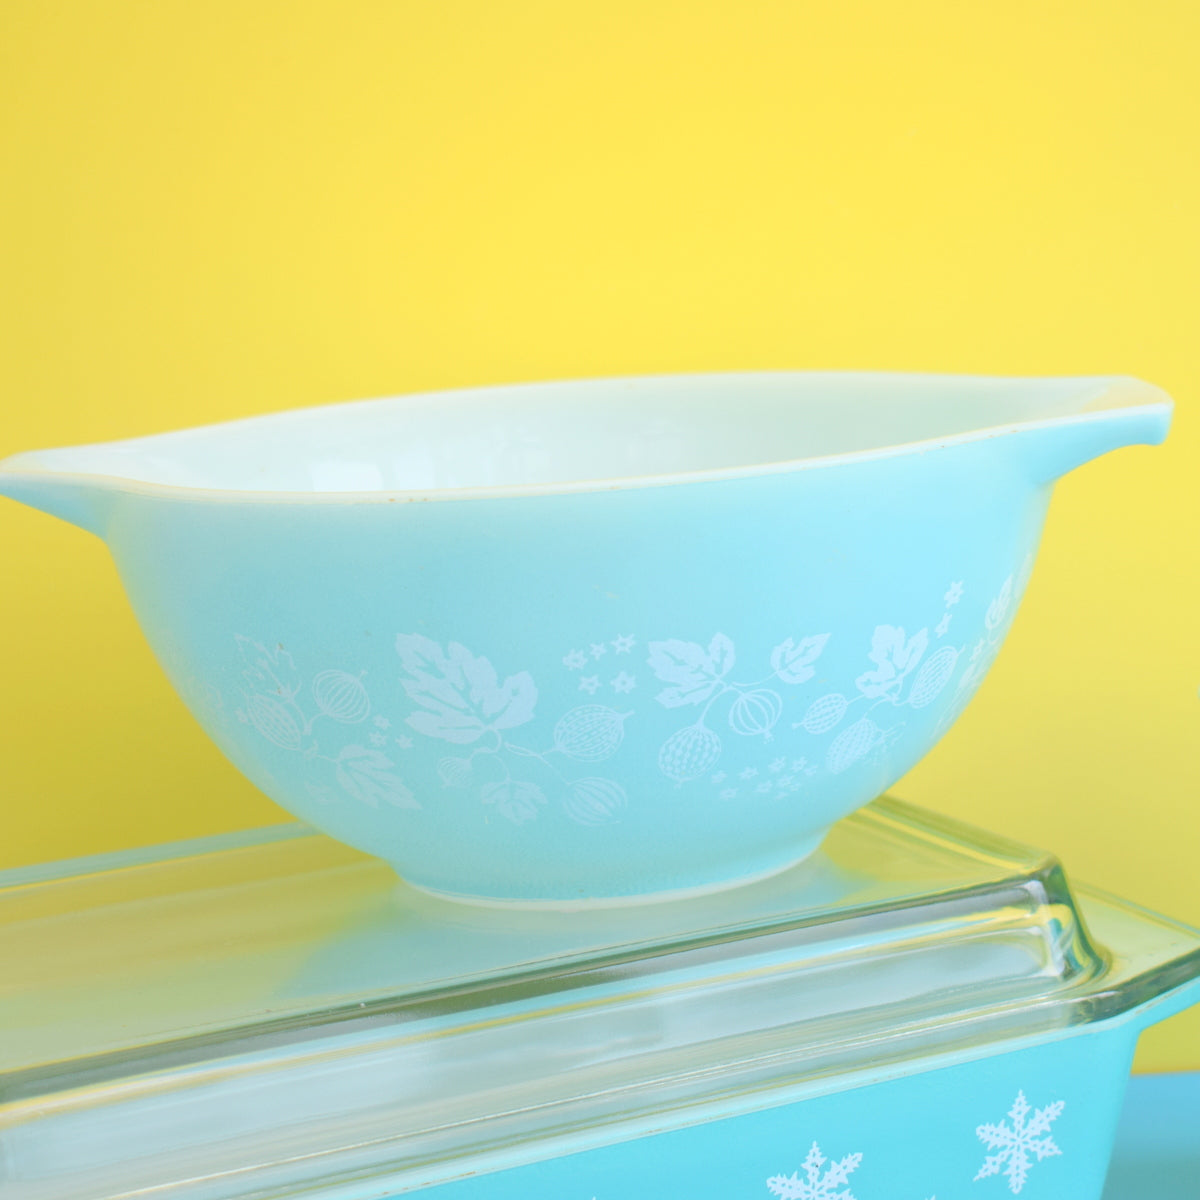 Vintage 1950s Pyrex Pieces- Snowflake, Gooseberry - Space Saver, Mixing Bowl Or Custard Cups -Turquoise .